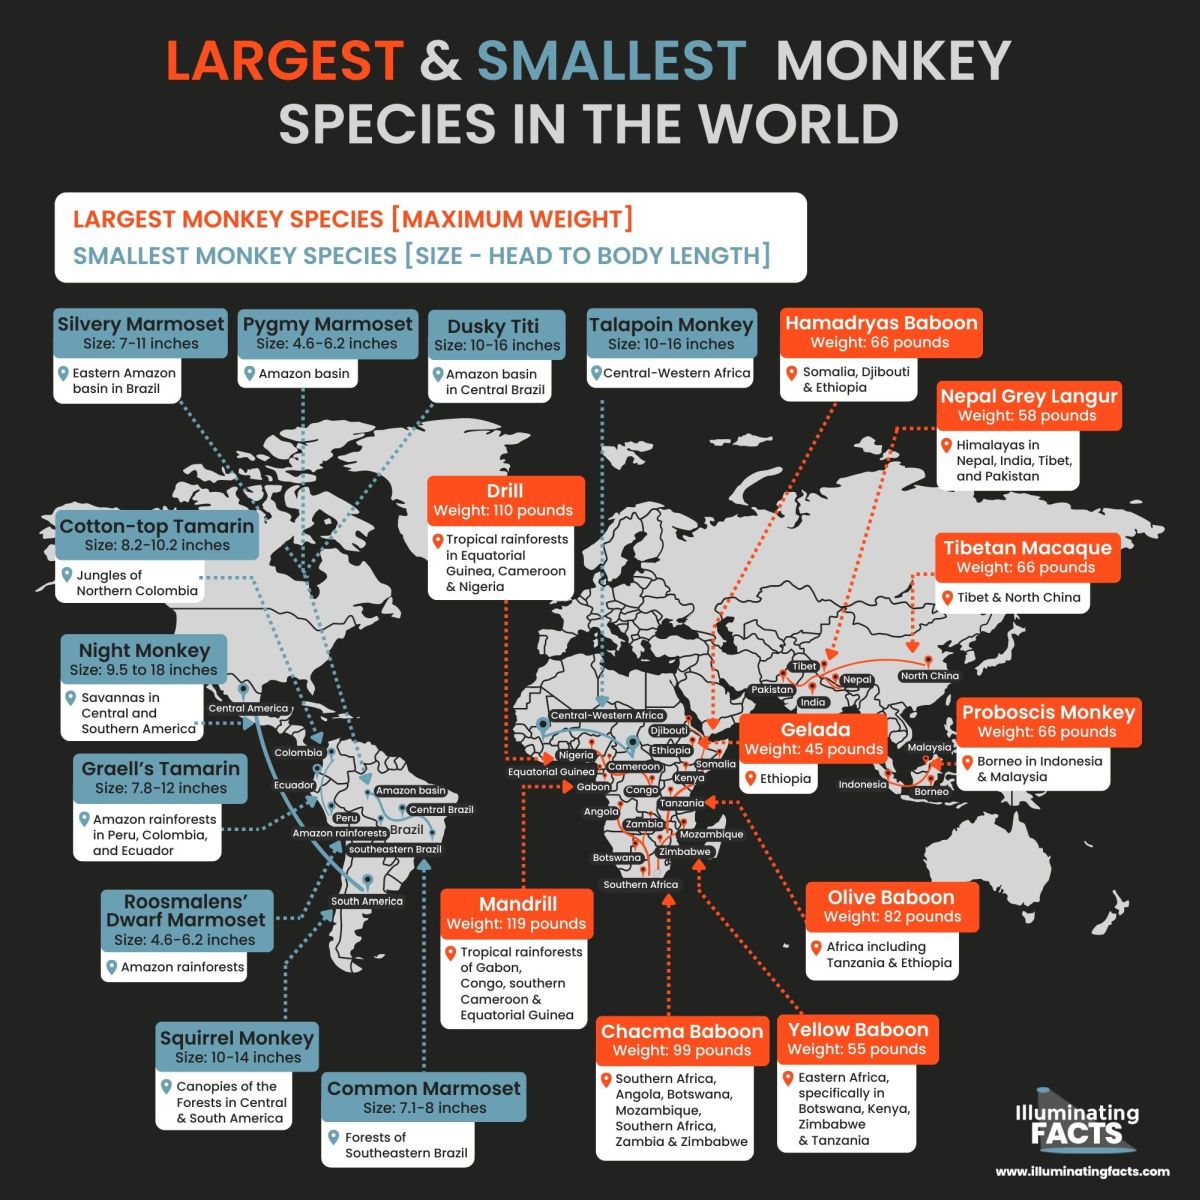 Largest & Smallest Monkey Species in the World